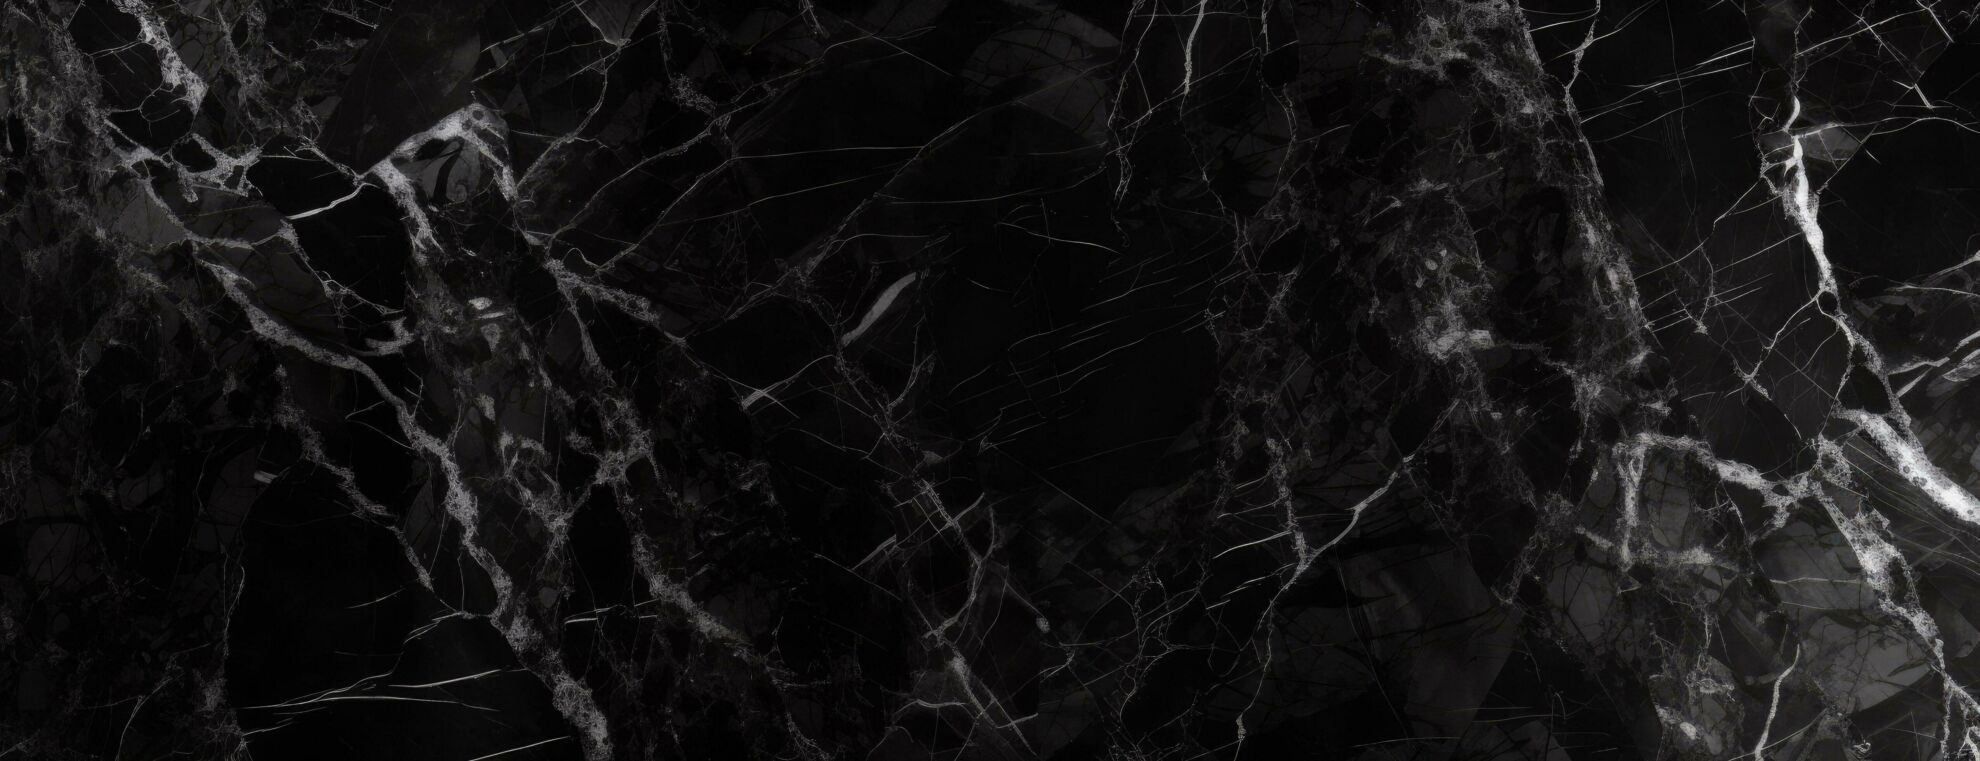 Natural black marble texture for skin tile wallpaper free photo scaled